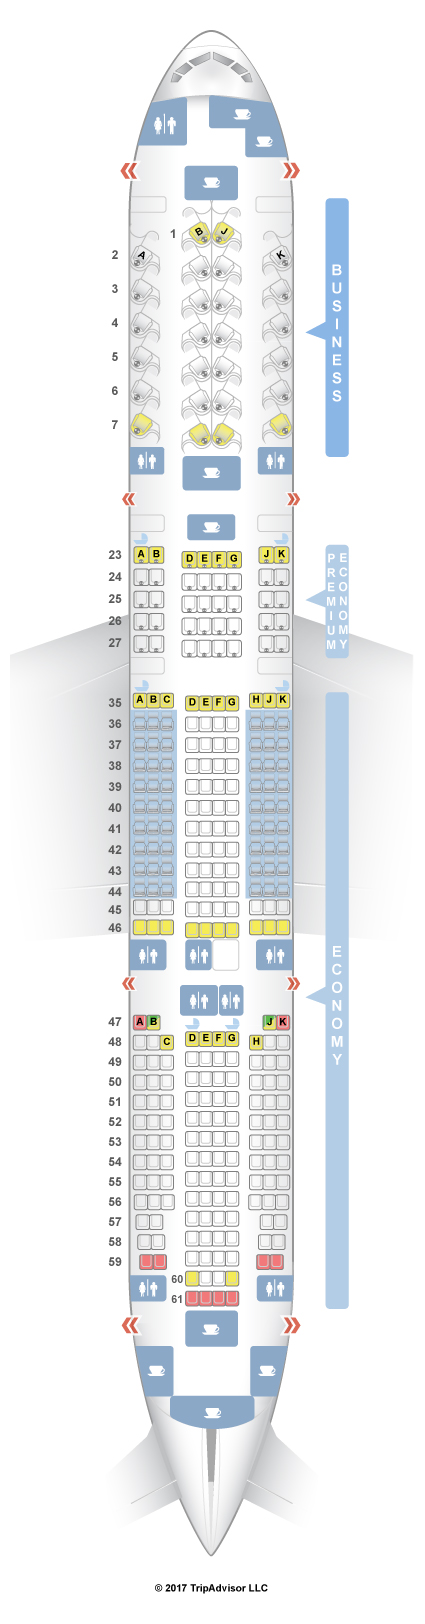 777 Theatre Seating Chart